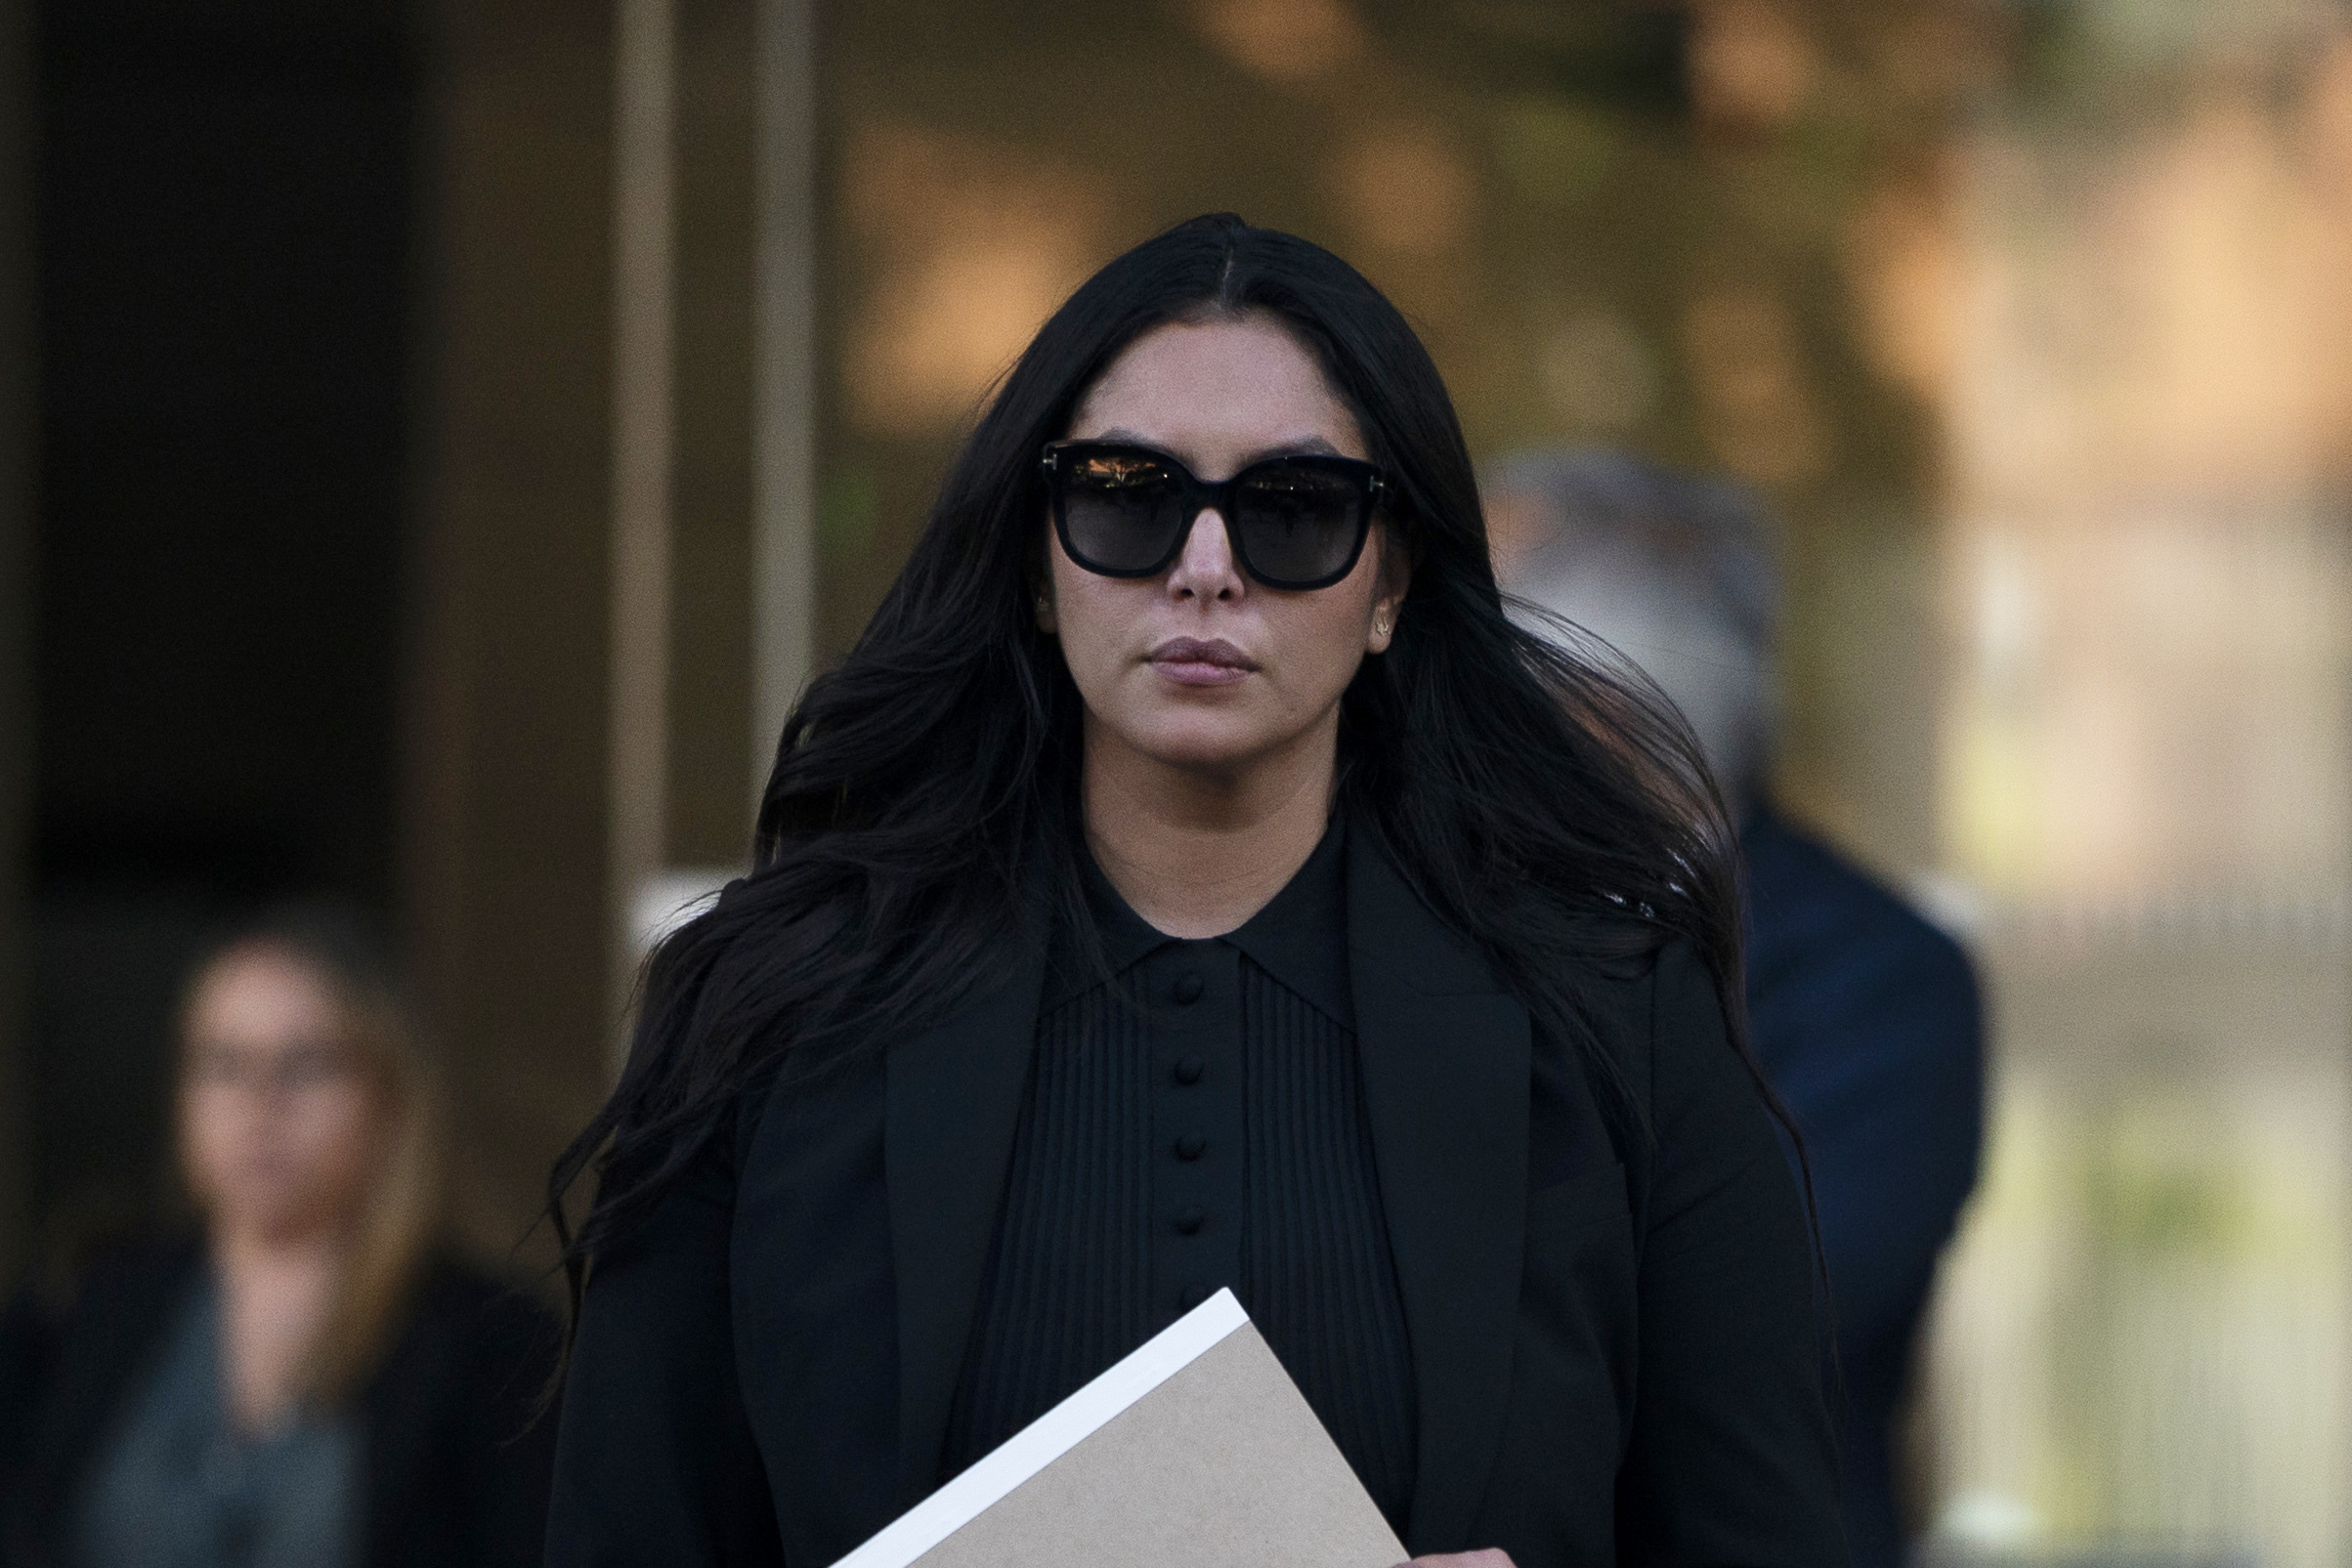 FILE - Vanessa Bryant, the widow of Kobe Bryant, leaves a federal courthouse in Los Angeles, Wednesday, Aug. 10, 2022. A federal jury has found that Los Angeles County must pay Kobe Bryant's widow $16 million over photos of the NBA star's body at the site of the 2020 helicopter crash that killed him. The jurors who returned the verdict Wednesday, Aug. 24, 2022, agreed with Vanessa Bryant and her attorneys that her privacy was invaded when deputies and firefighters took and shared photos of the remains of Kobe Bryant and their 13-year-old daughter Gianna. (AP Photo/Jae C. Hong, File)